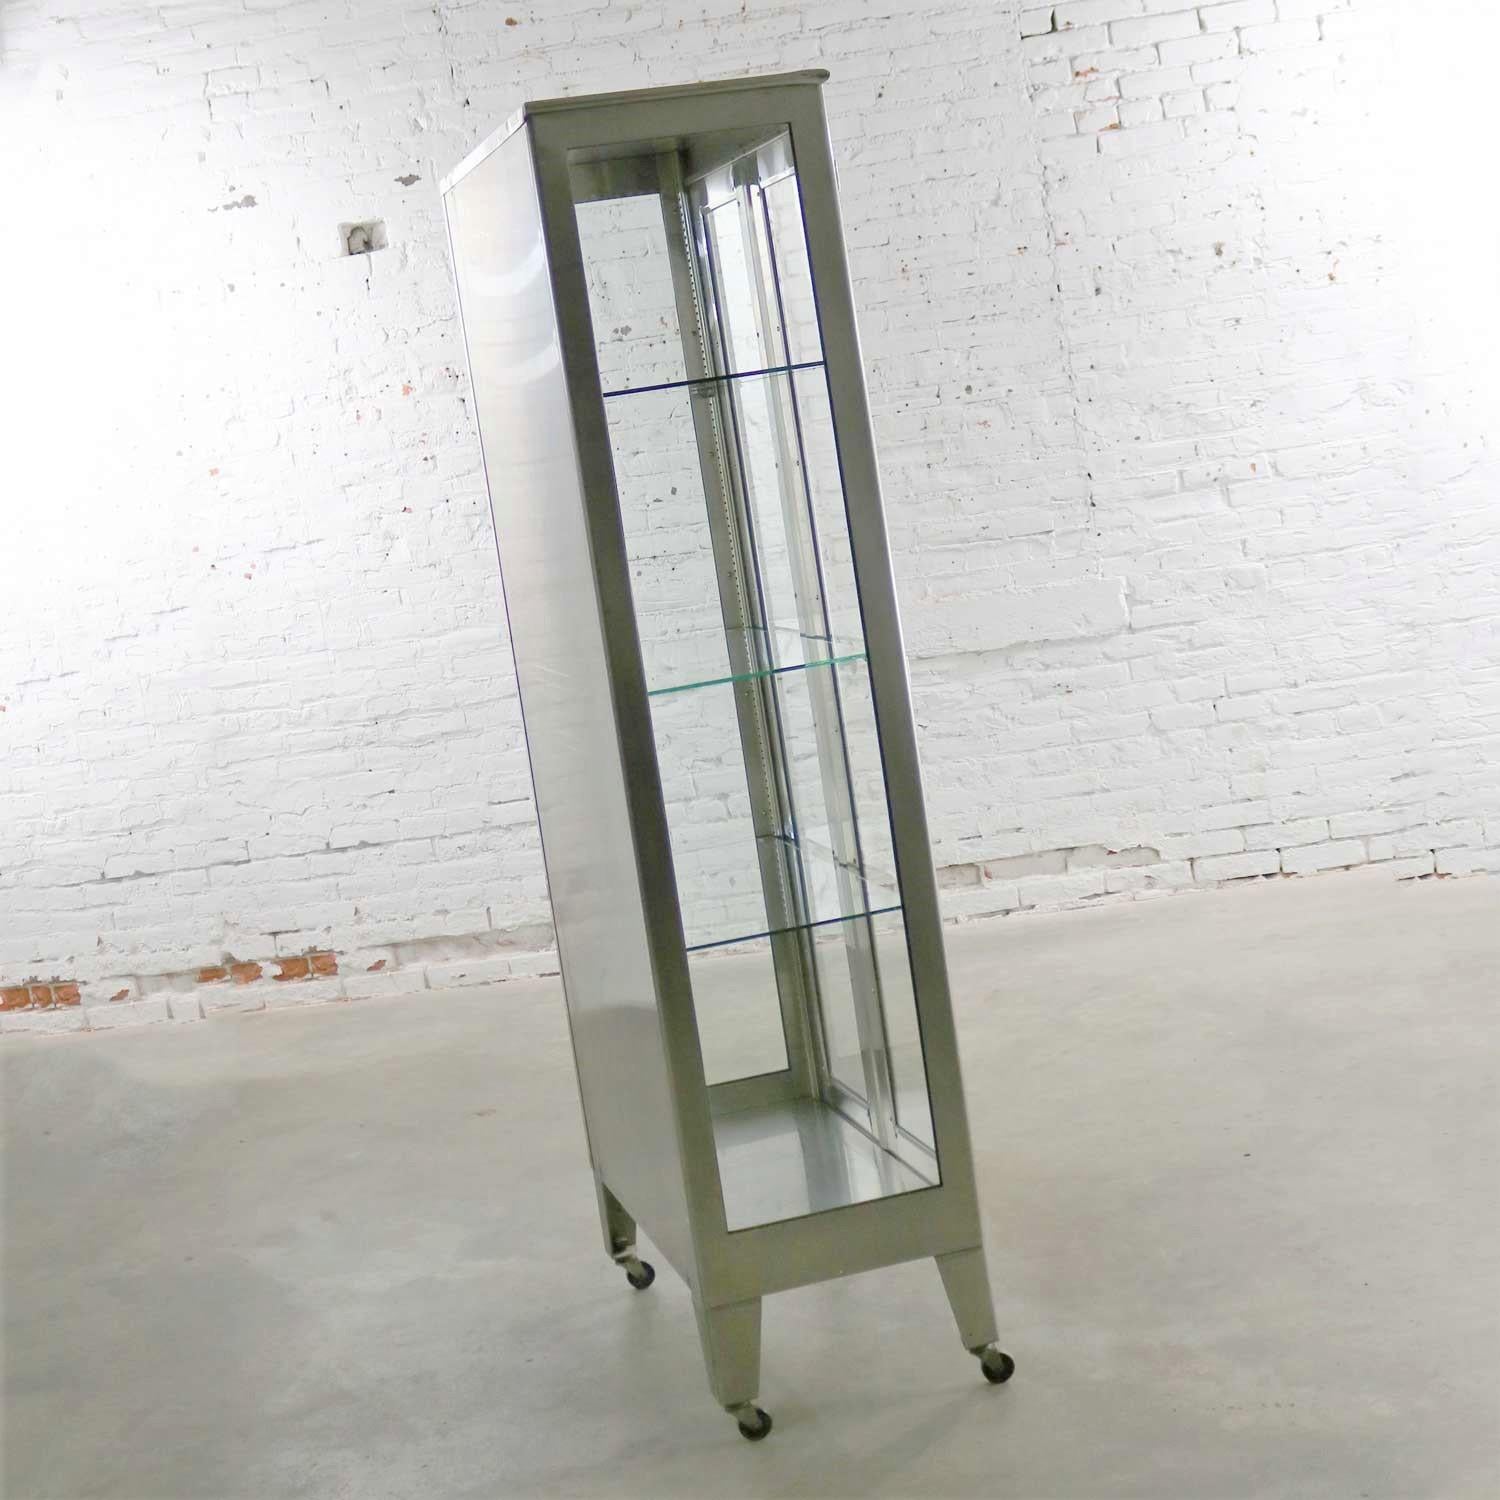 Vintage Stainless-Steel Industrial Display Apothecary Medical Cabinet with Glass 6